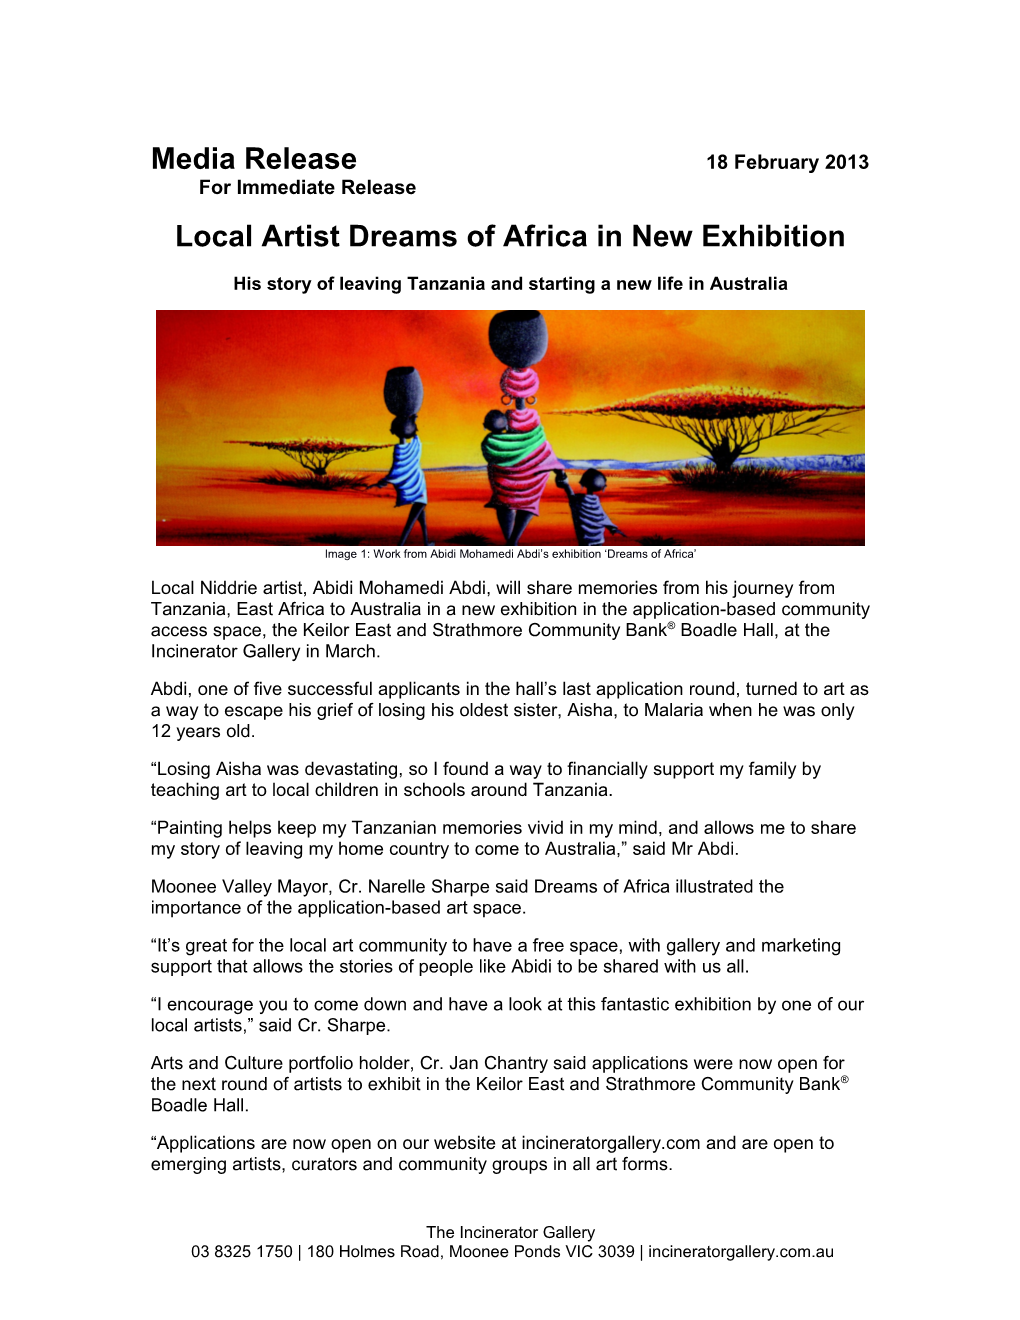 Local Artist Dreams of Africa in New Exhibition